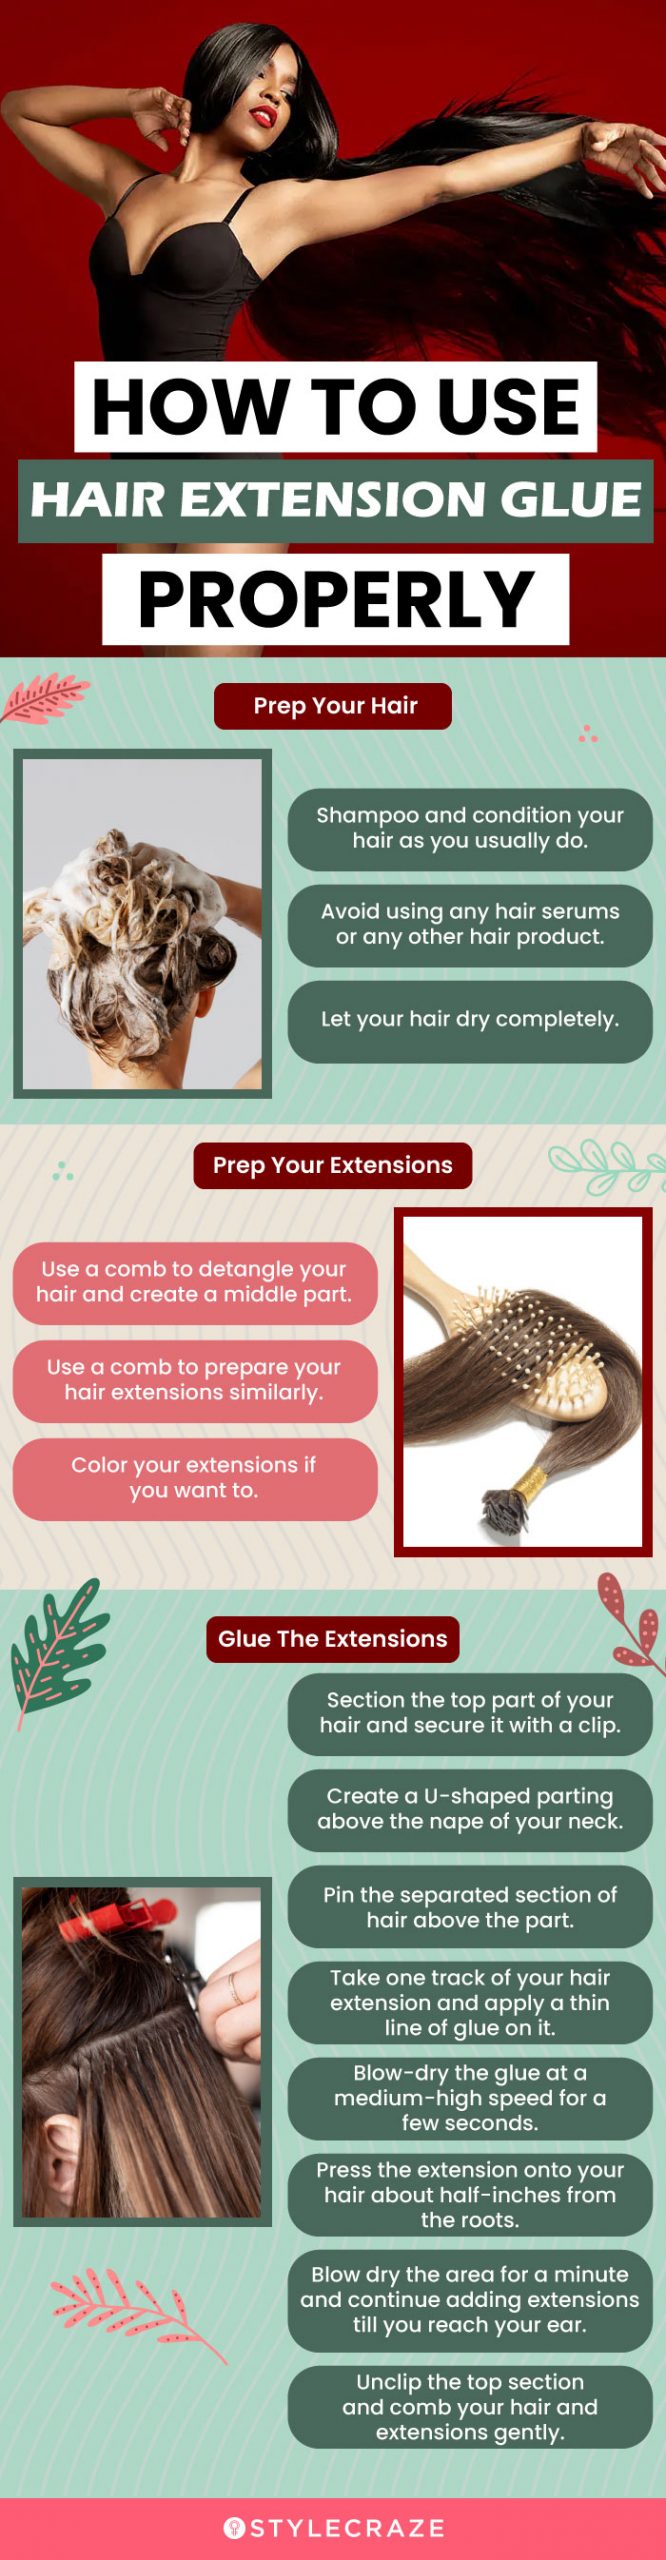 How To Use Hair Extension Glue Properly (infographic)